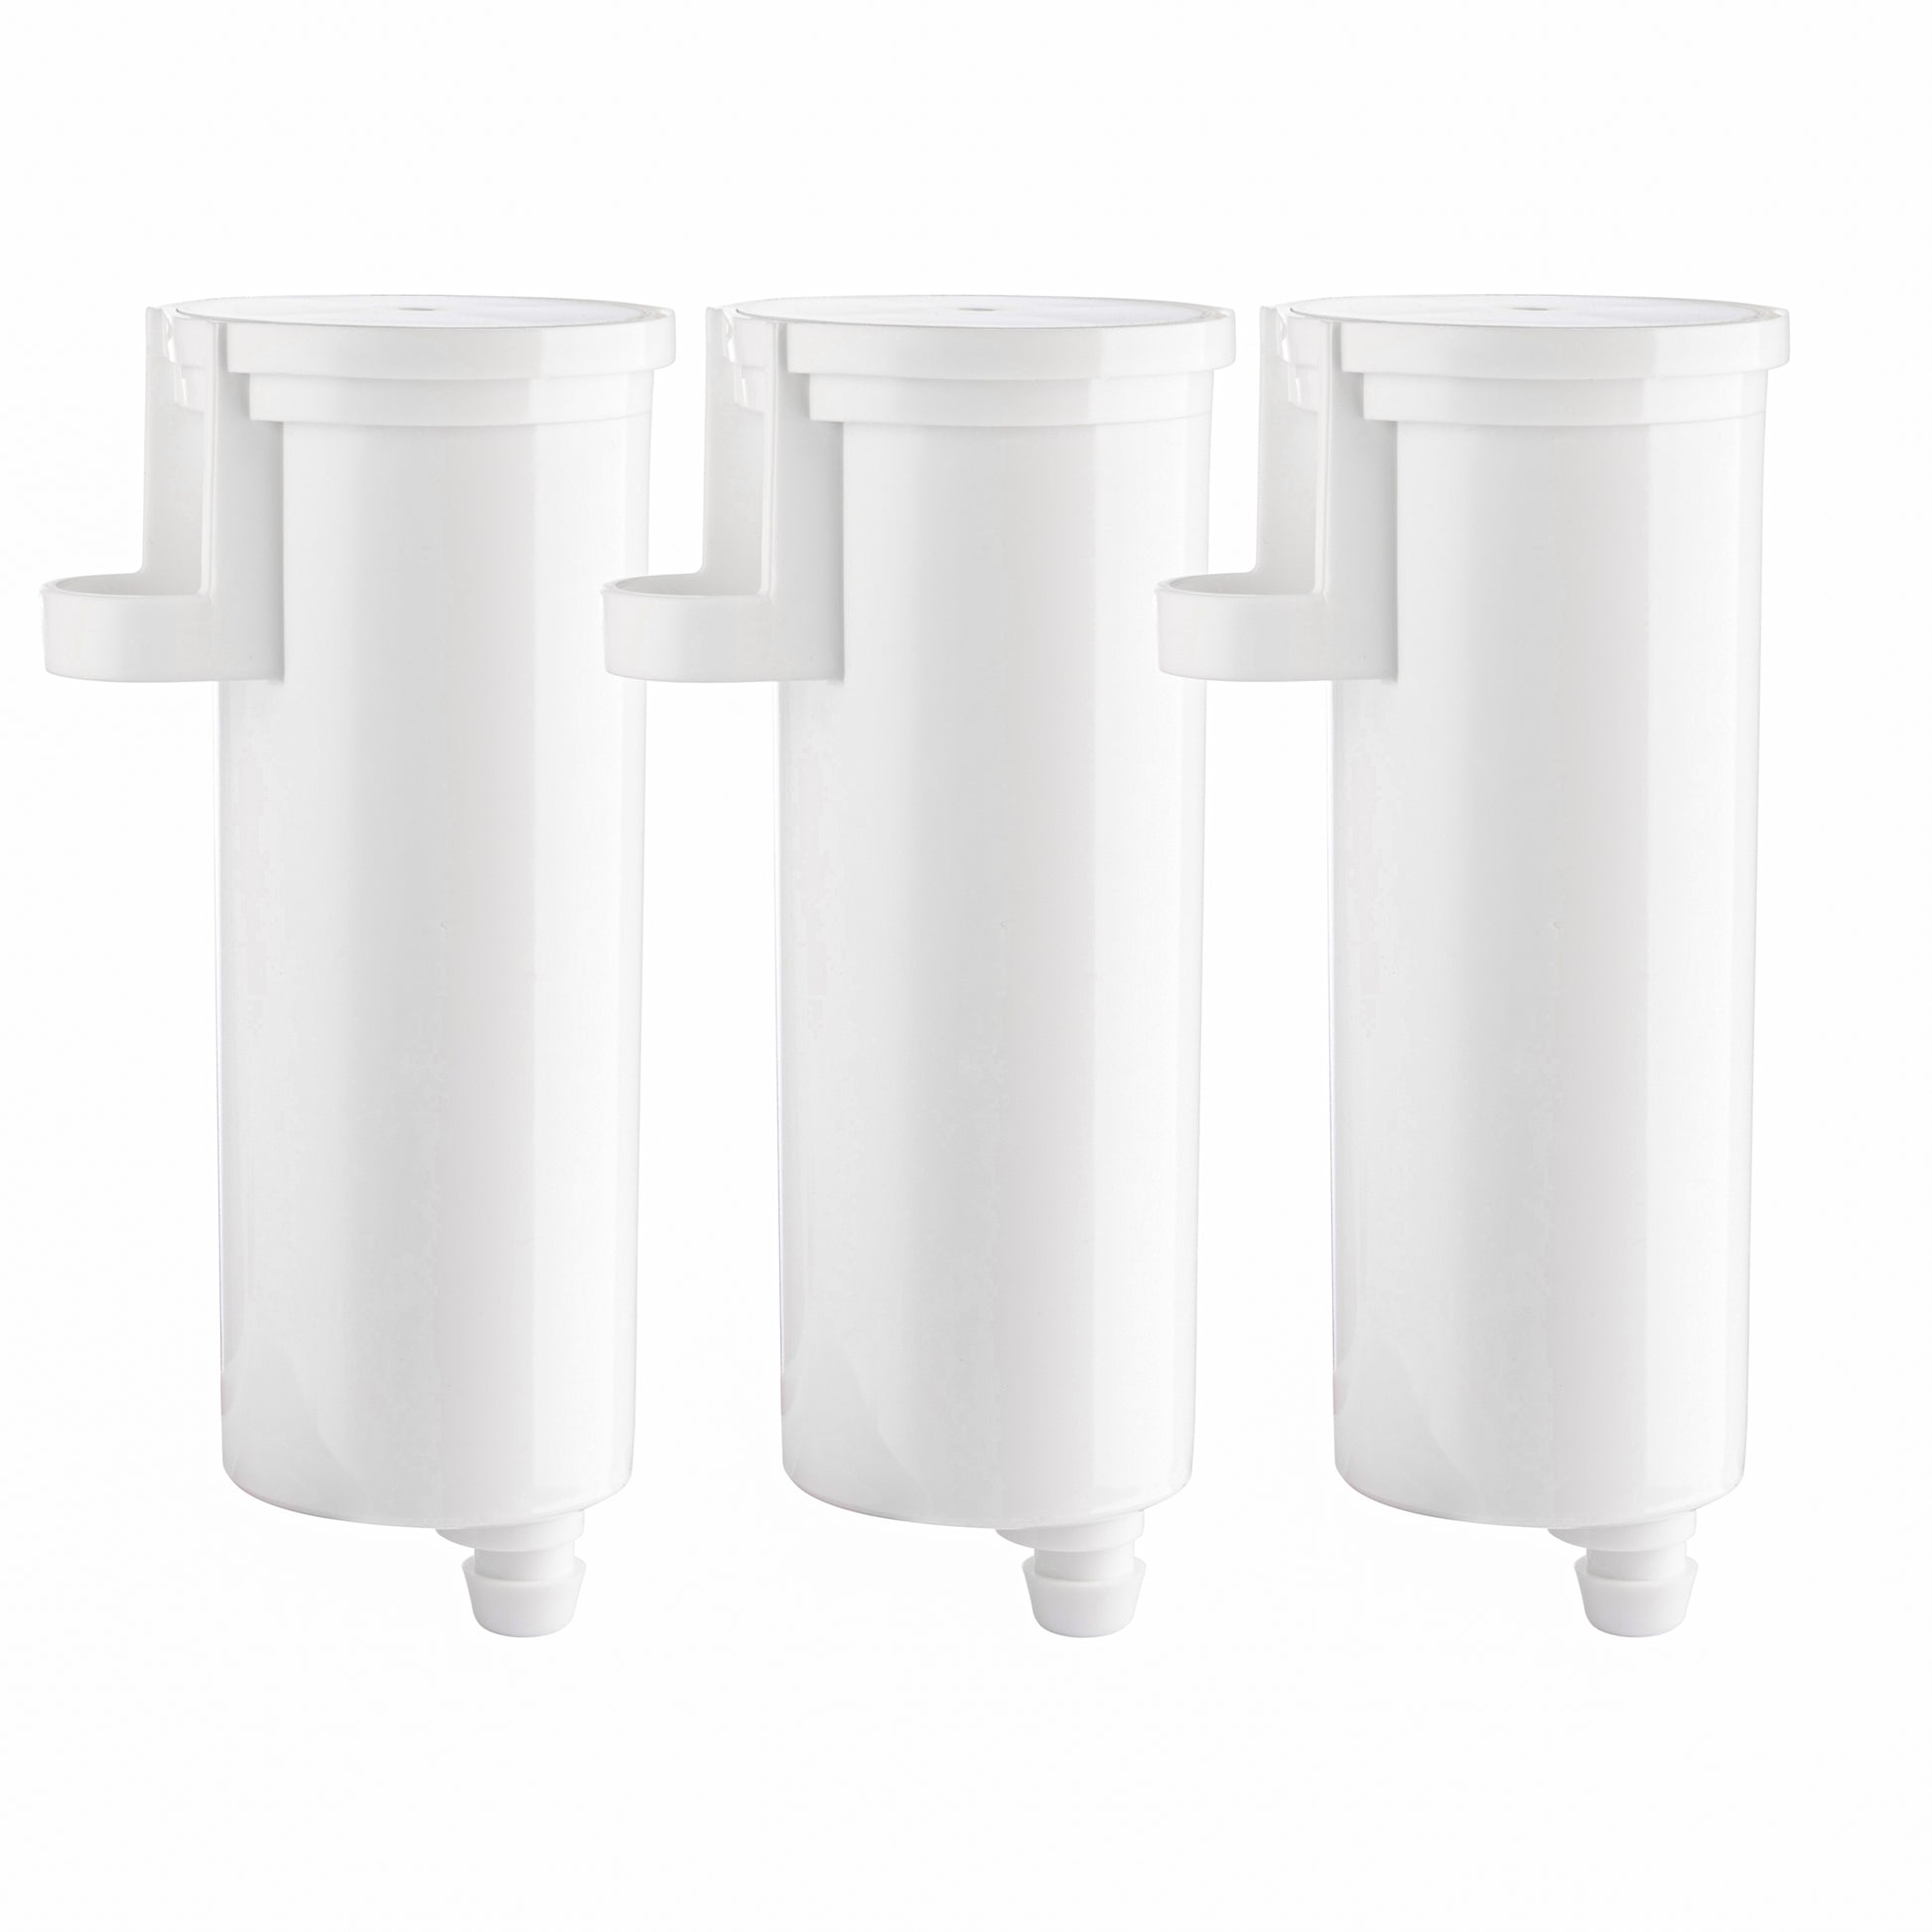  Replacement For GE Profile Opal Ice Maker Filter, Ge Opal  Ice Maker Filter Replace Every 3 Months For Best Results, Opal Ice Maker  Filter Replacement Easy Install, Opal Filter, 2 Pack